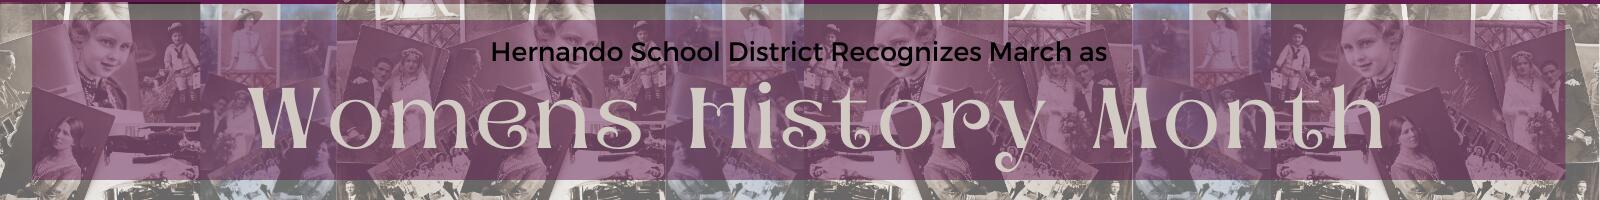 Hernando School District Reconizes March as Women's History Month